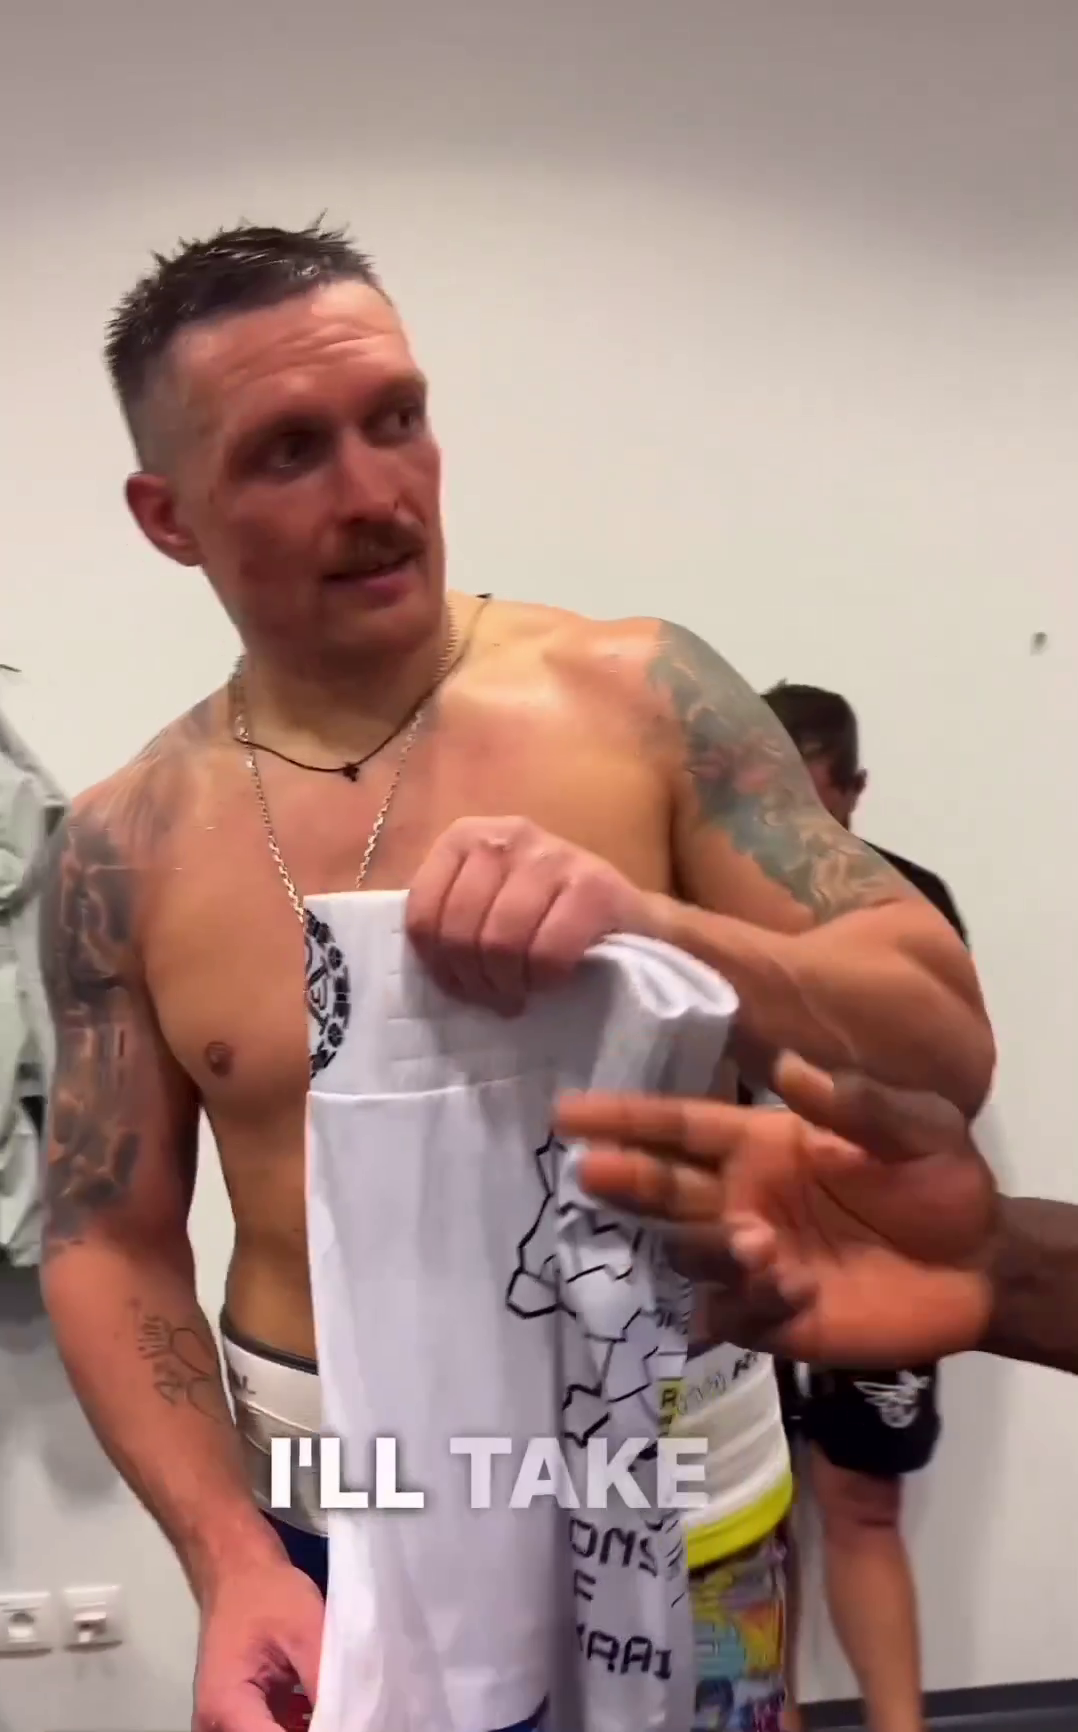 How Usyk looked after missing 47 punches to the head and body. Video from the locker room after the fight with Dubois has appeared